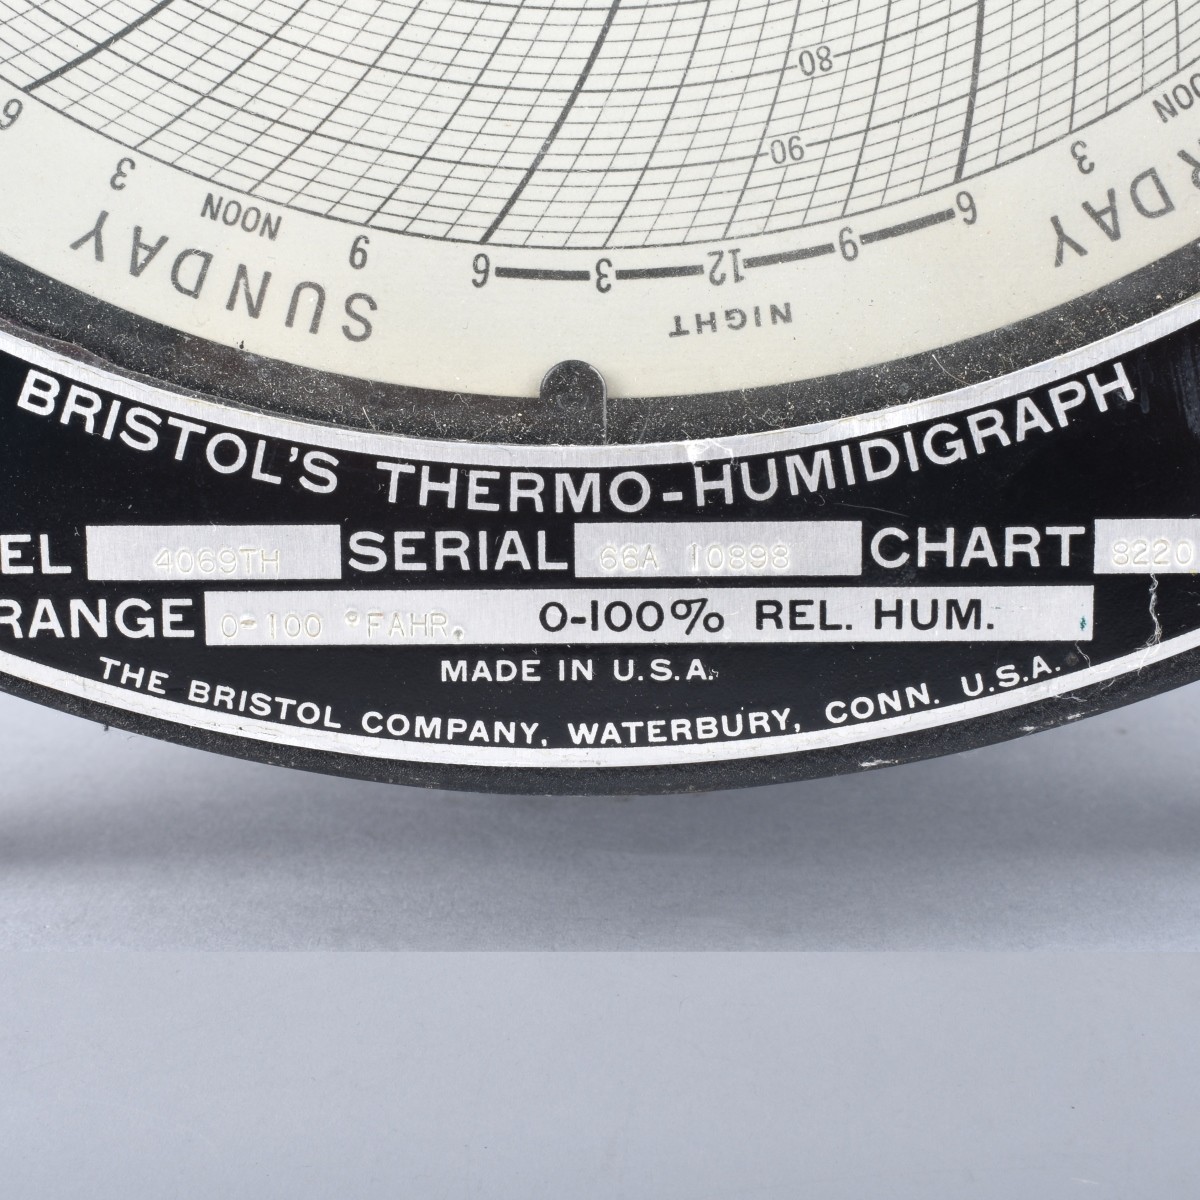 The Bristol Co. Thermo Humidigraph